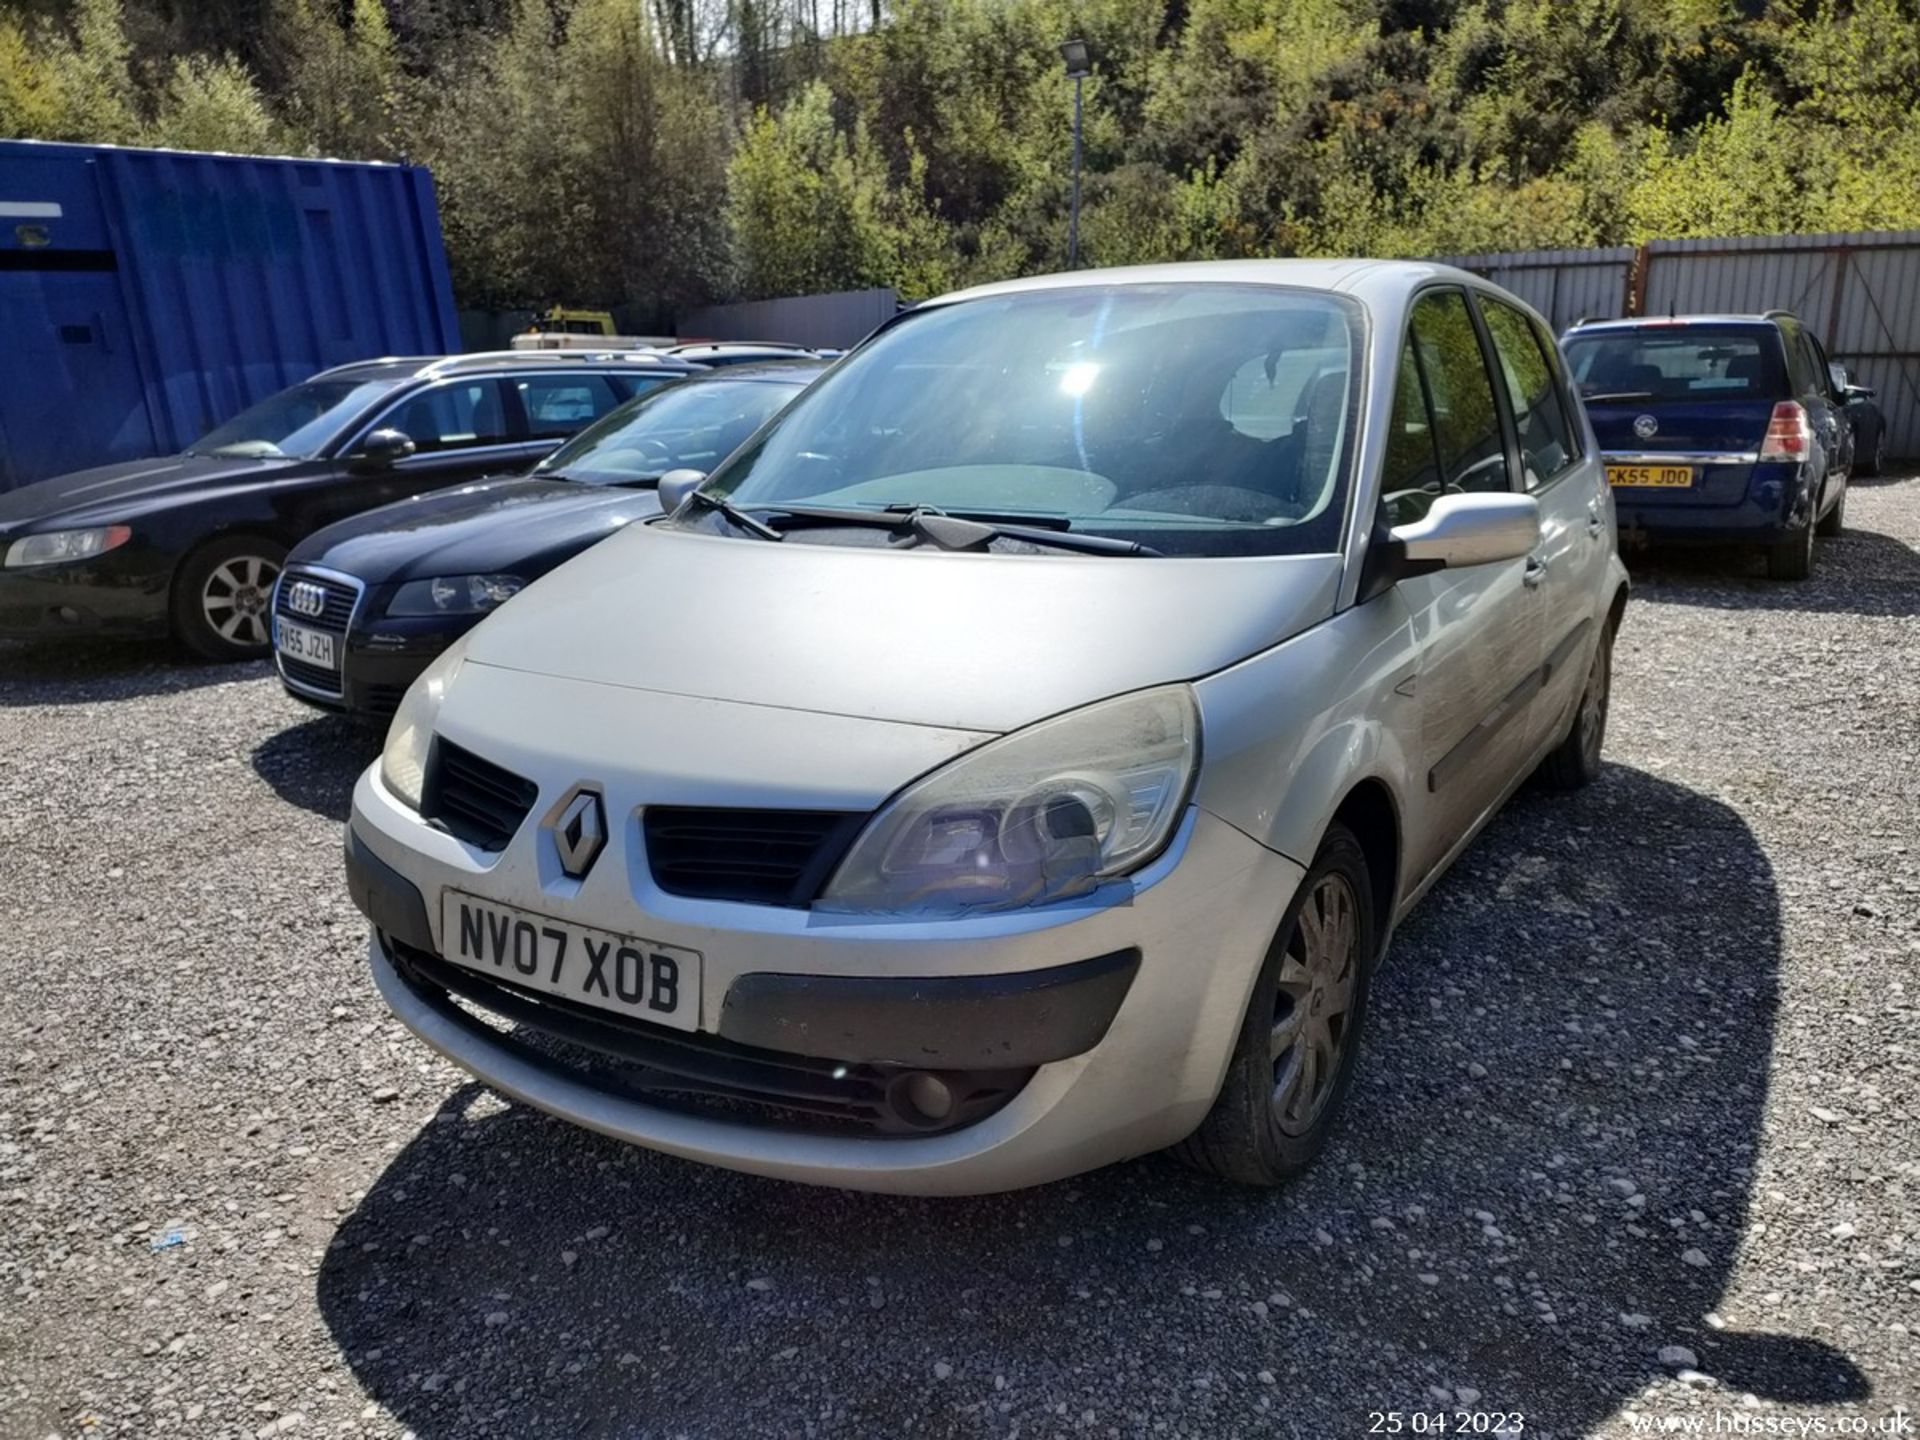 07/07 RENAULT SCENIC DYN VVT - 1598cc 5dr MPV (Silver) - Image 8 of 34